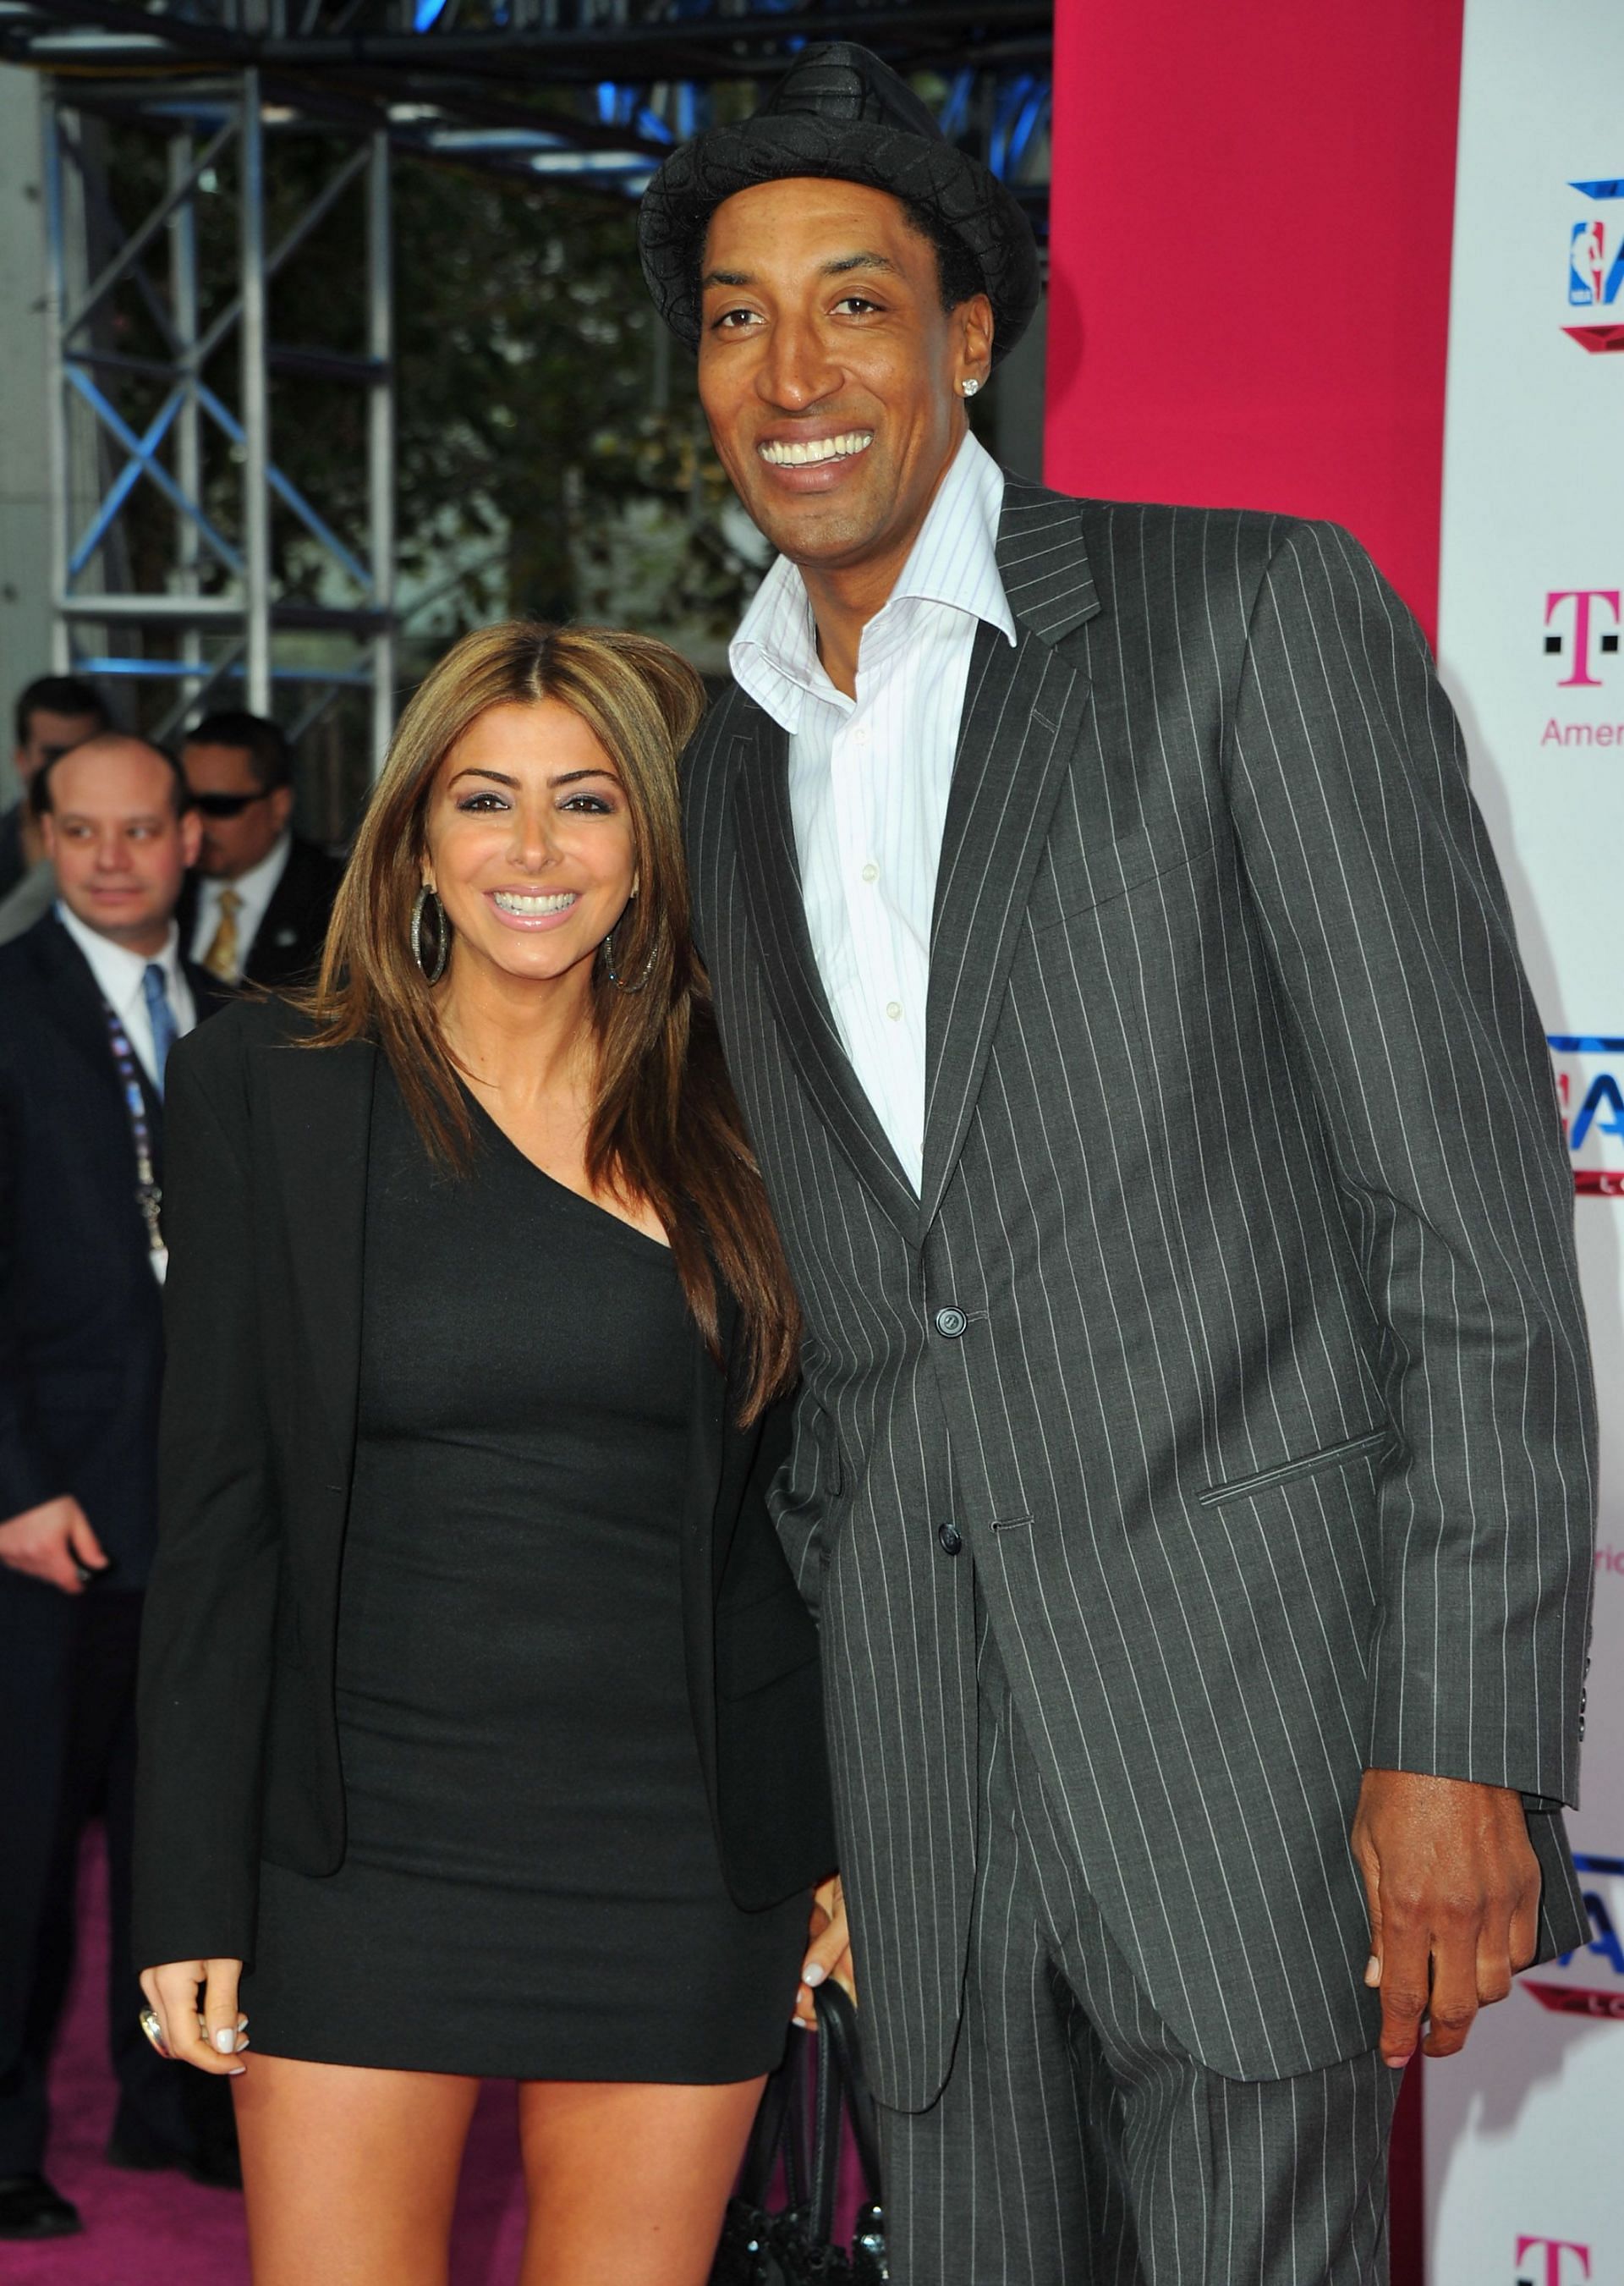 Scottie and Larsa Pippen were together for more than two decades (Image via Getty Images)